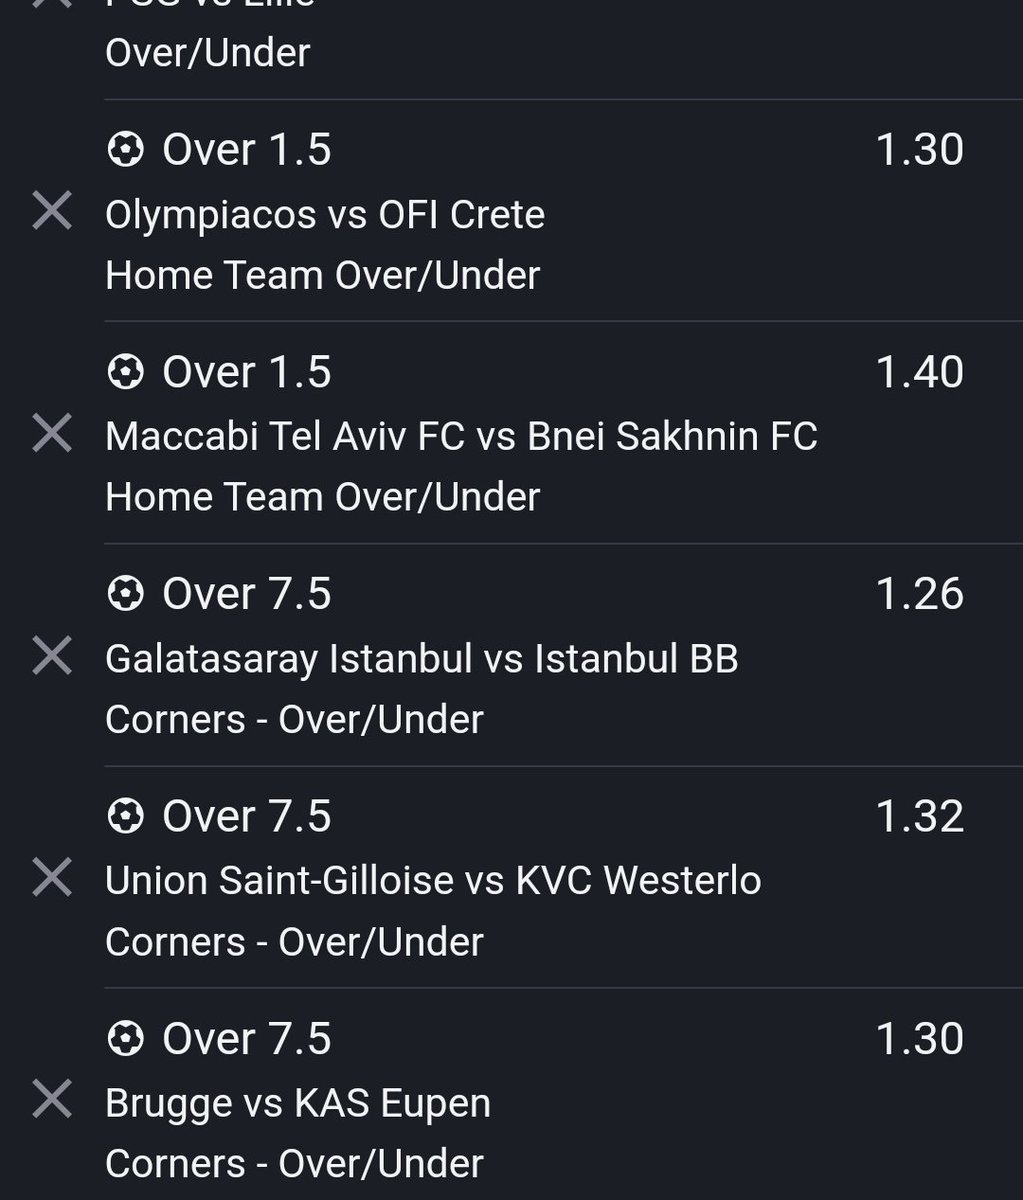 Make we try this 20+ odds on Sporty today.

BAD8C6B9
52B5D9DD

Edit if you can.

Ejoor nor bet with your house rent or school fees. 🙏

#mybettingsites #SaturdayTips